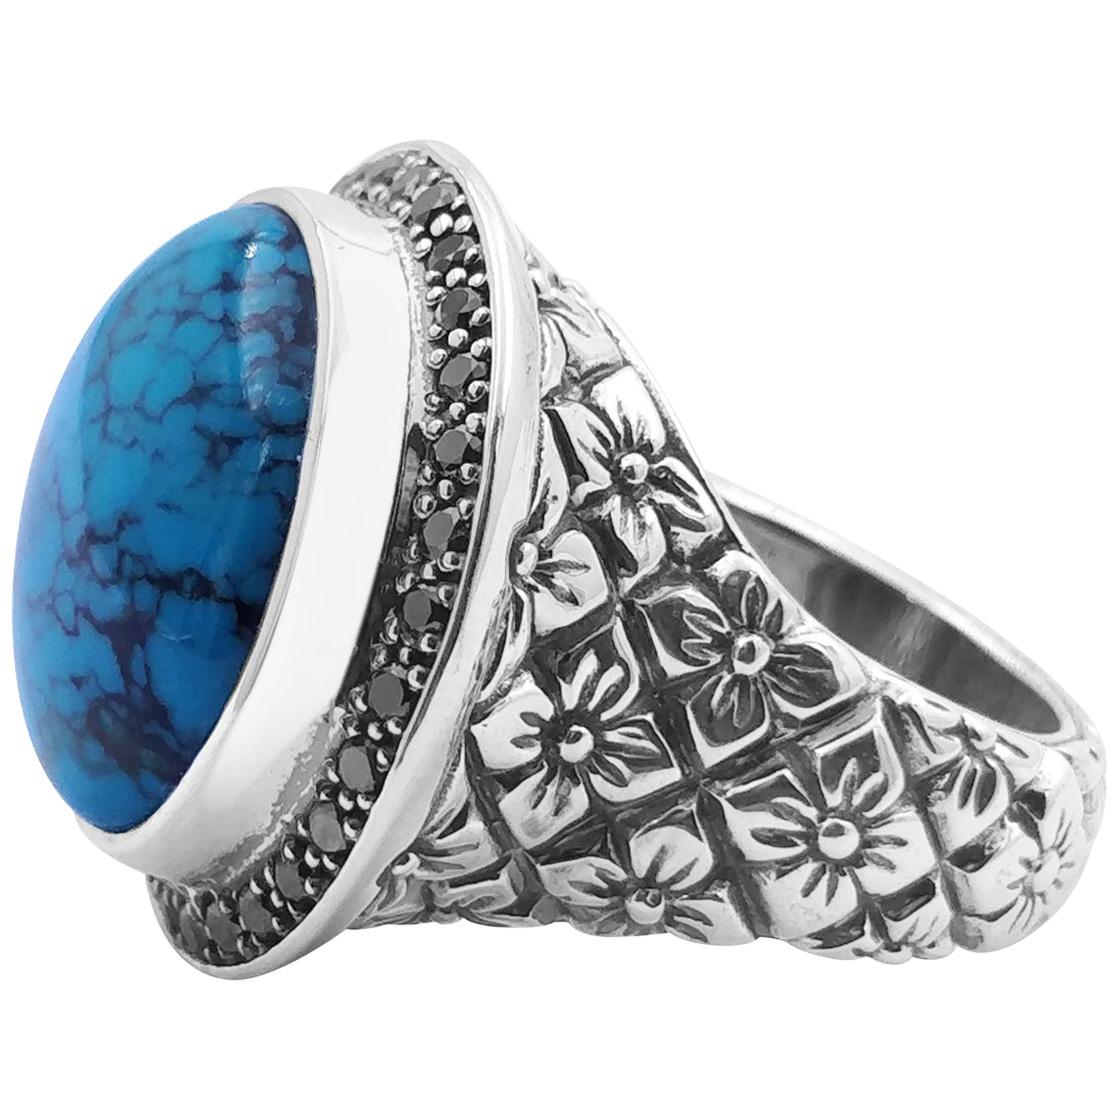 Step into the enchanting world of Steven's Jewelry with the Rounded Gold Obsidian Cabochon Ring and Tibetan Turquoise Black Diamond Ring from the Garden of Stephen Collection. Crafted with meticulous attention to detail in 925 sterling silver, these